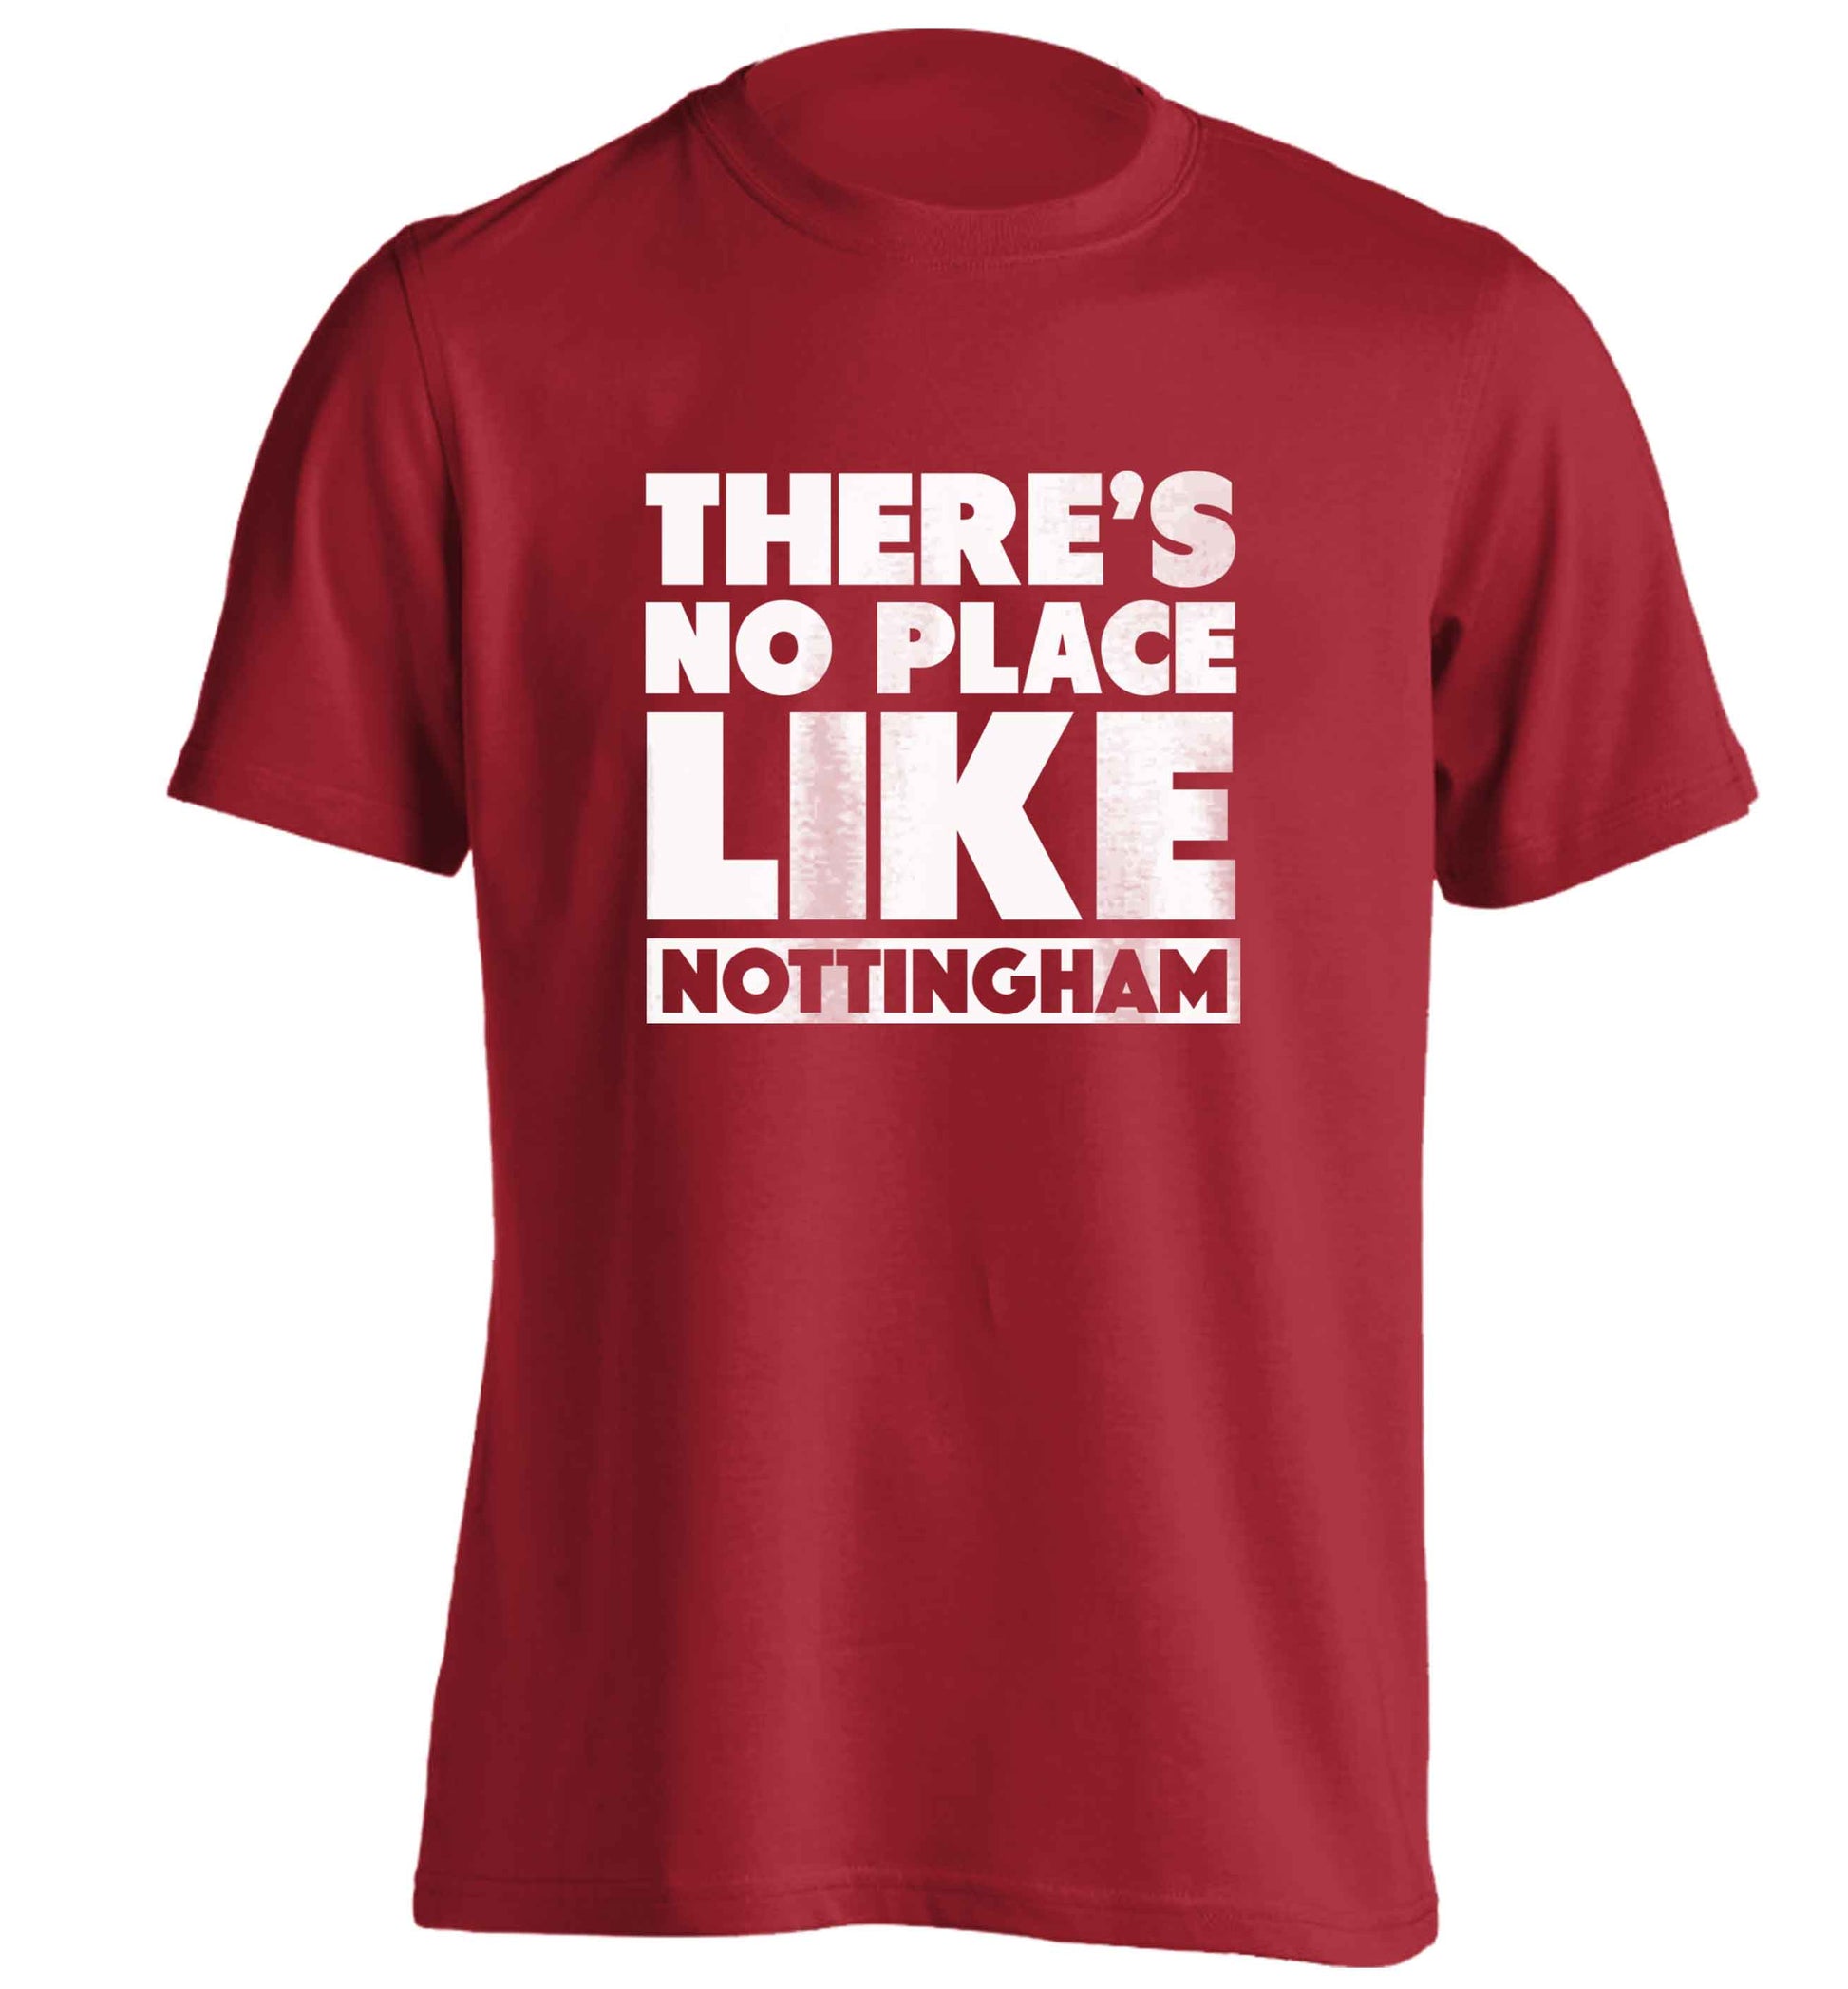 There's no place like Nottingham adults unisex red Tshirt 2XL